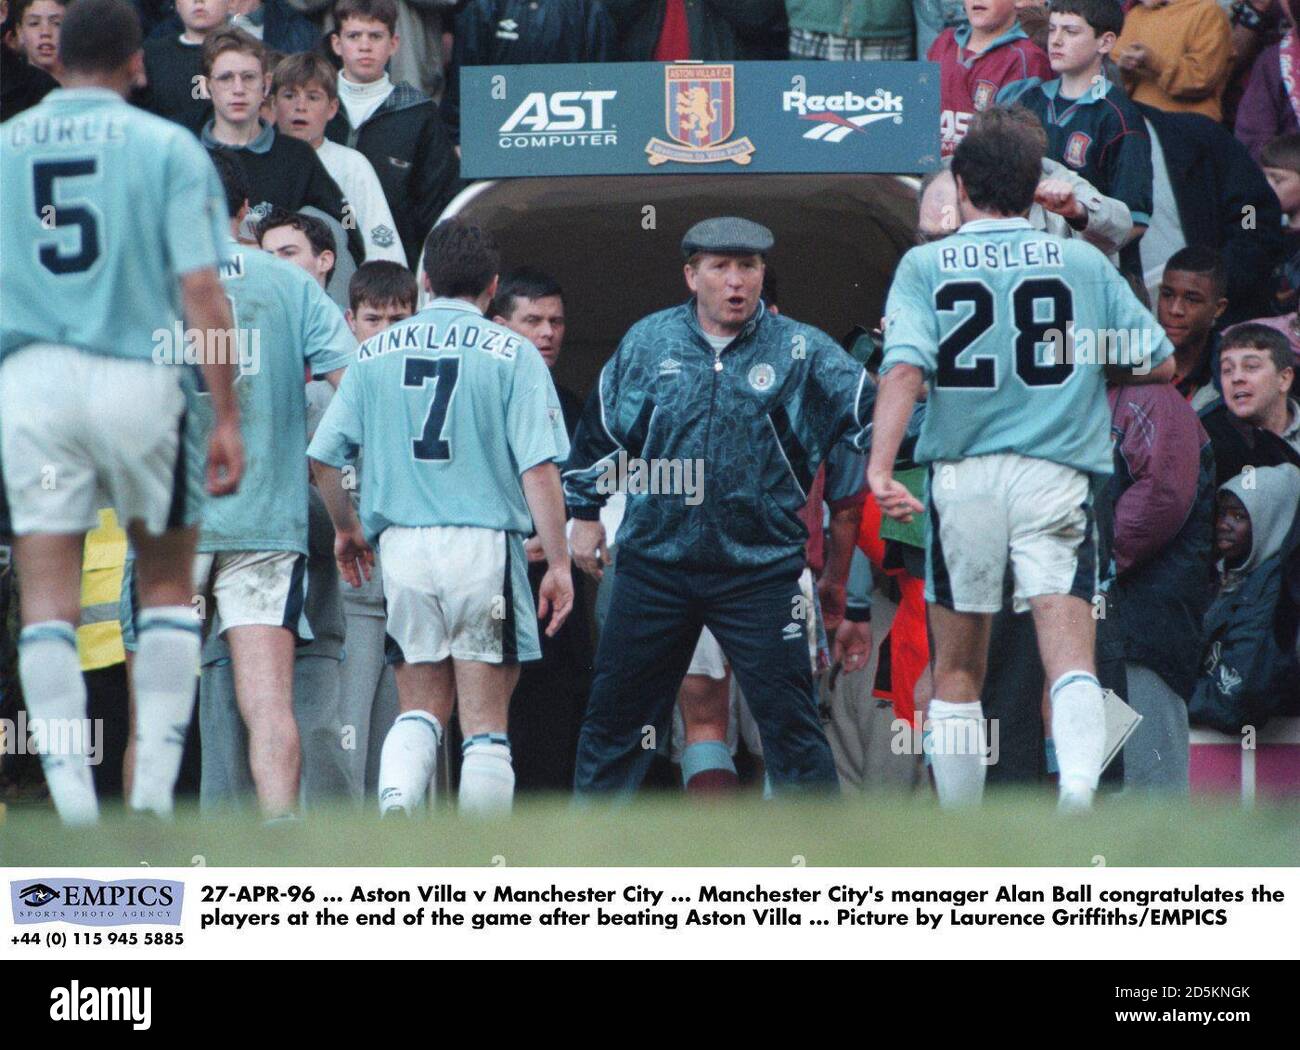 27-APR-96 ... Aston Villa v Manchester City ... Manchester City's manager Alan Ball congratulates the players at the end of the game after beating Aston Villa ... Picture by Laurence Griffiths/EMPICS Stock Photo